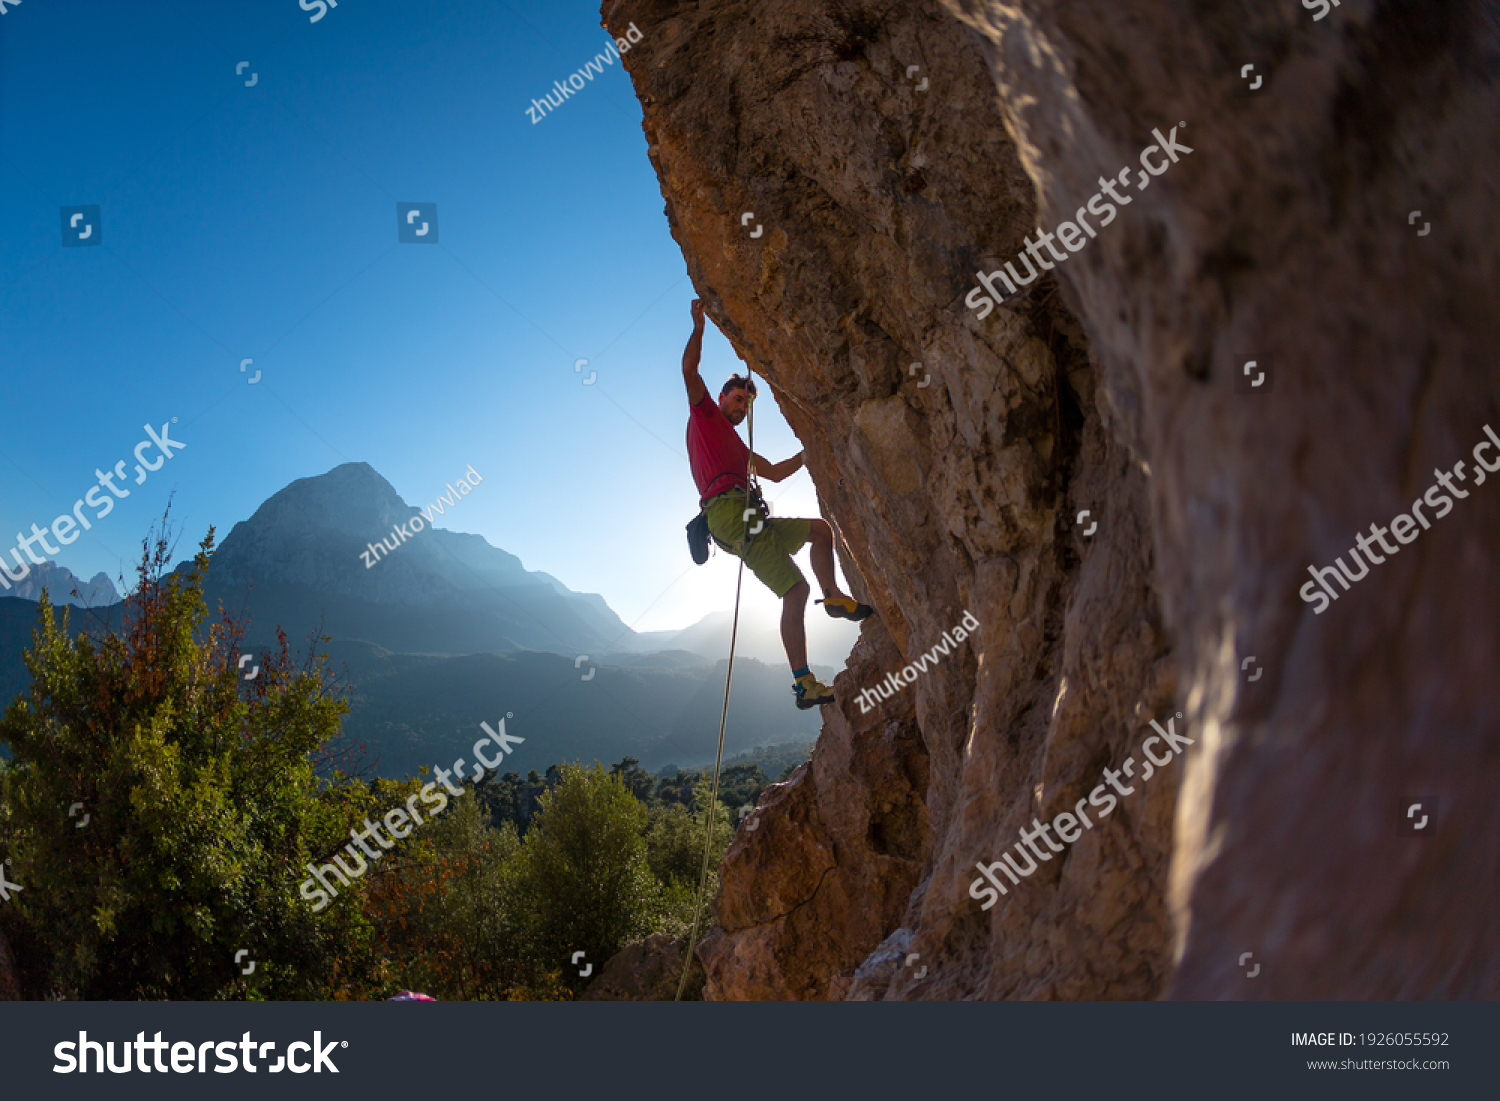 Athletic man climbs an overhanging rock with rope, lead climbing. silhouette of a rock climber on a mountain background. outdoor sports and recreation #1926055592